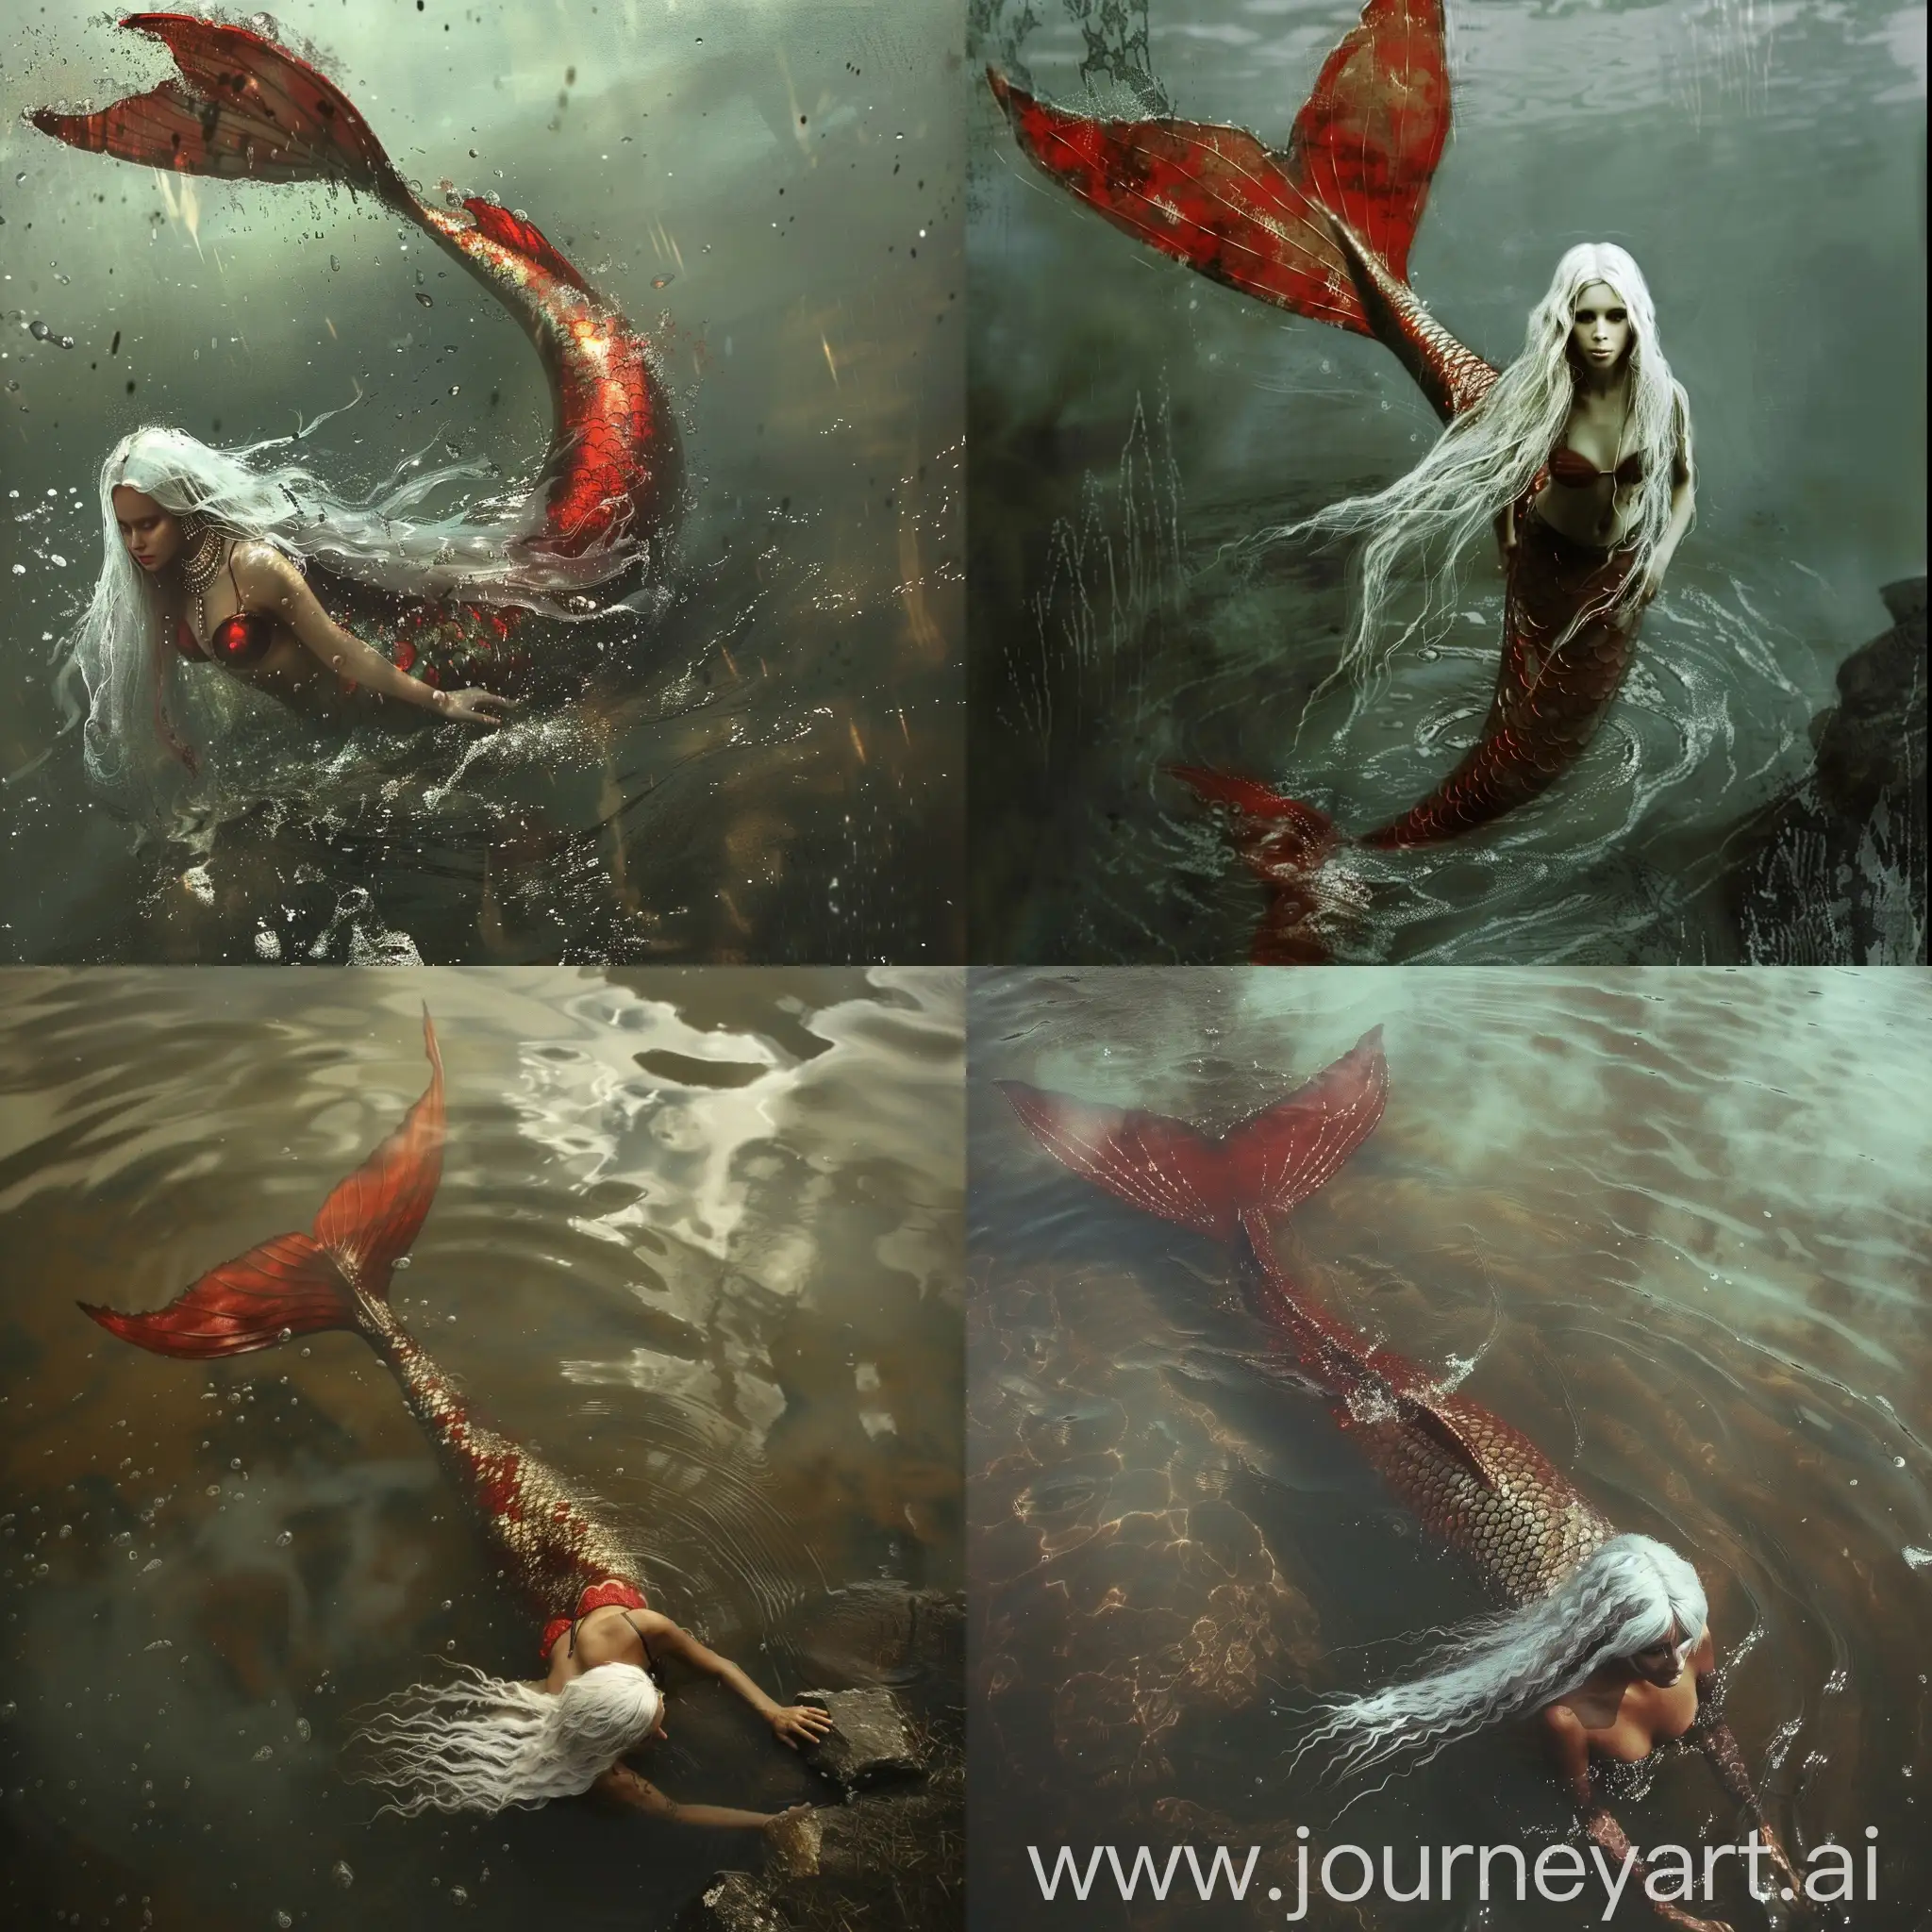 Enchanting-WhiteHaired-Mermaid-Swimming-in-Murky-Waters